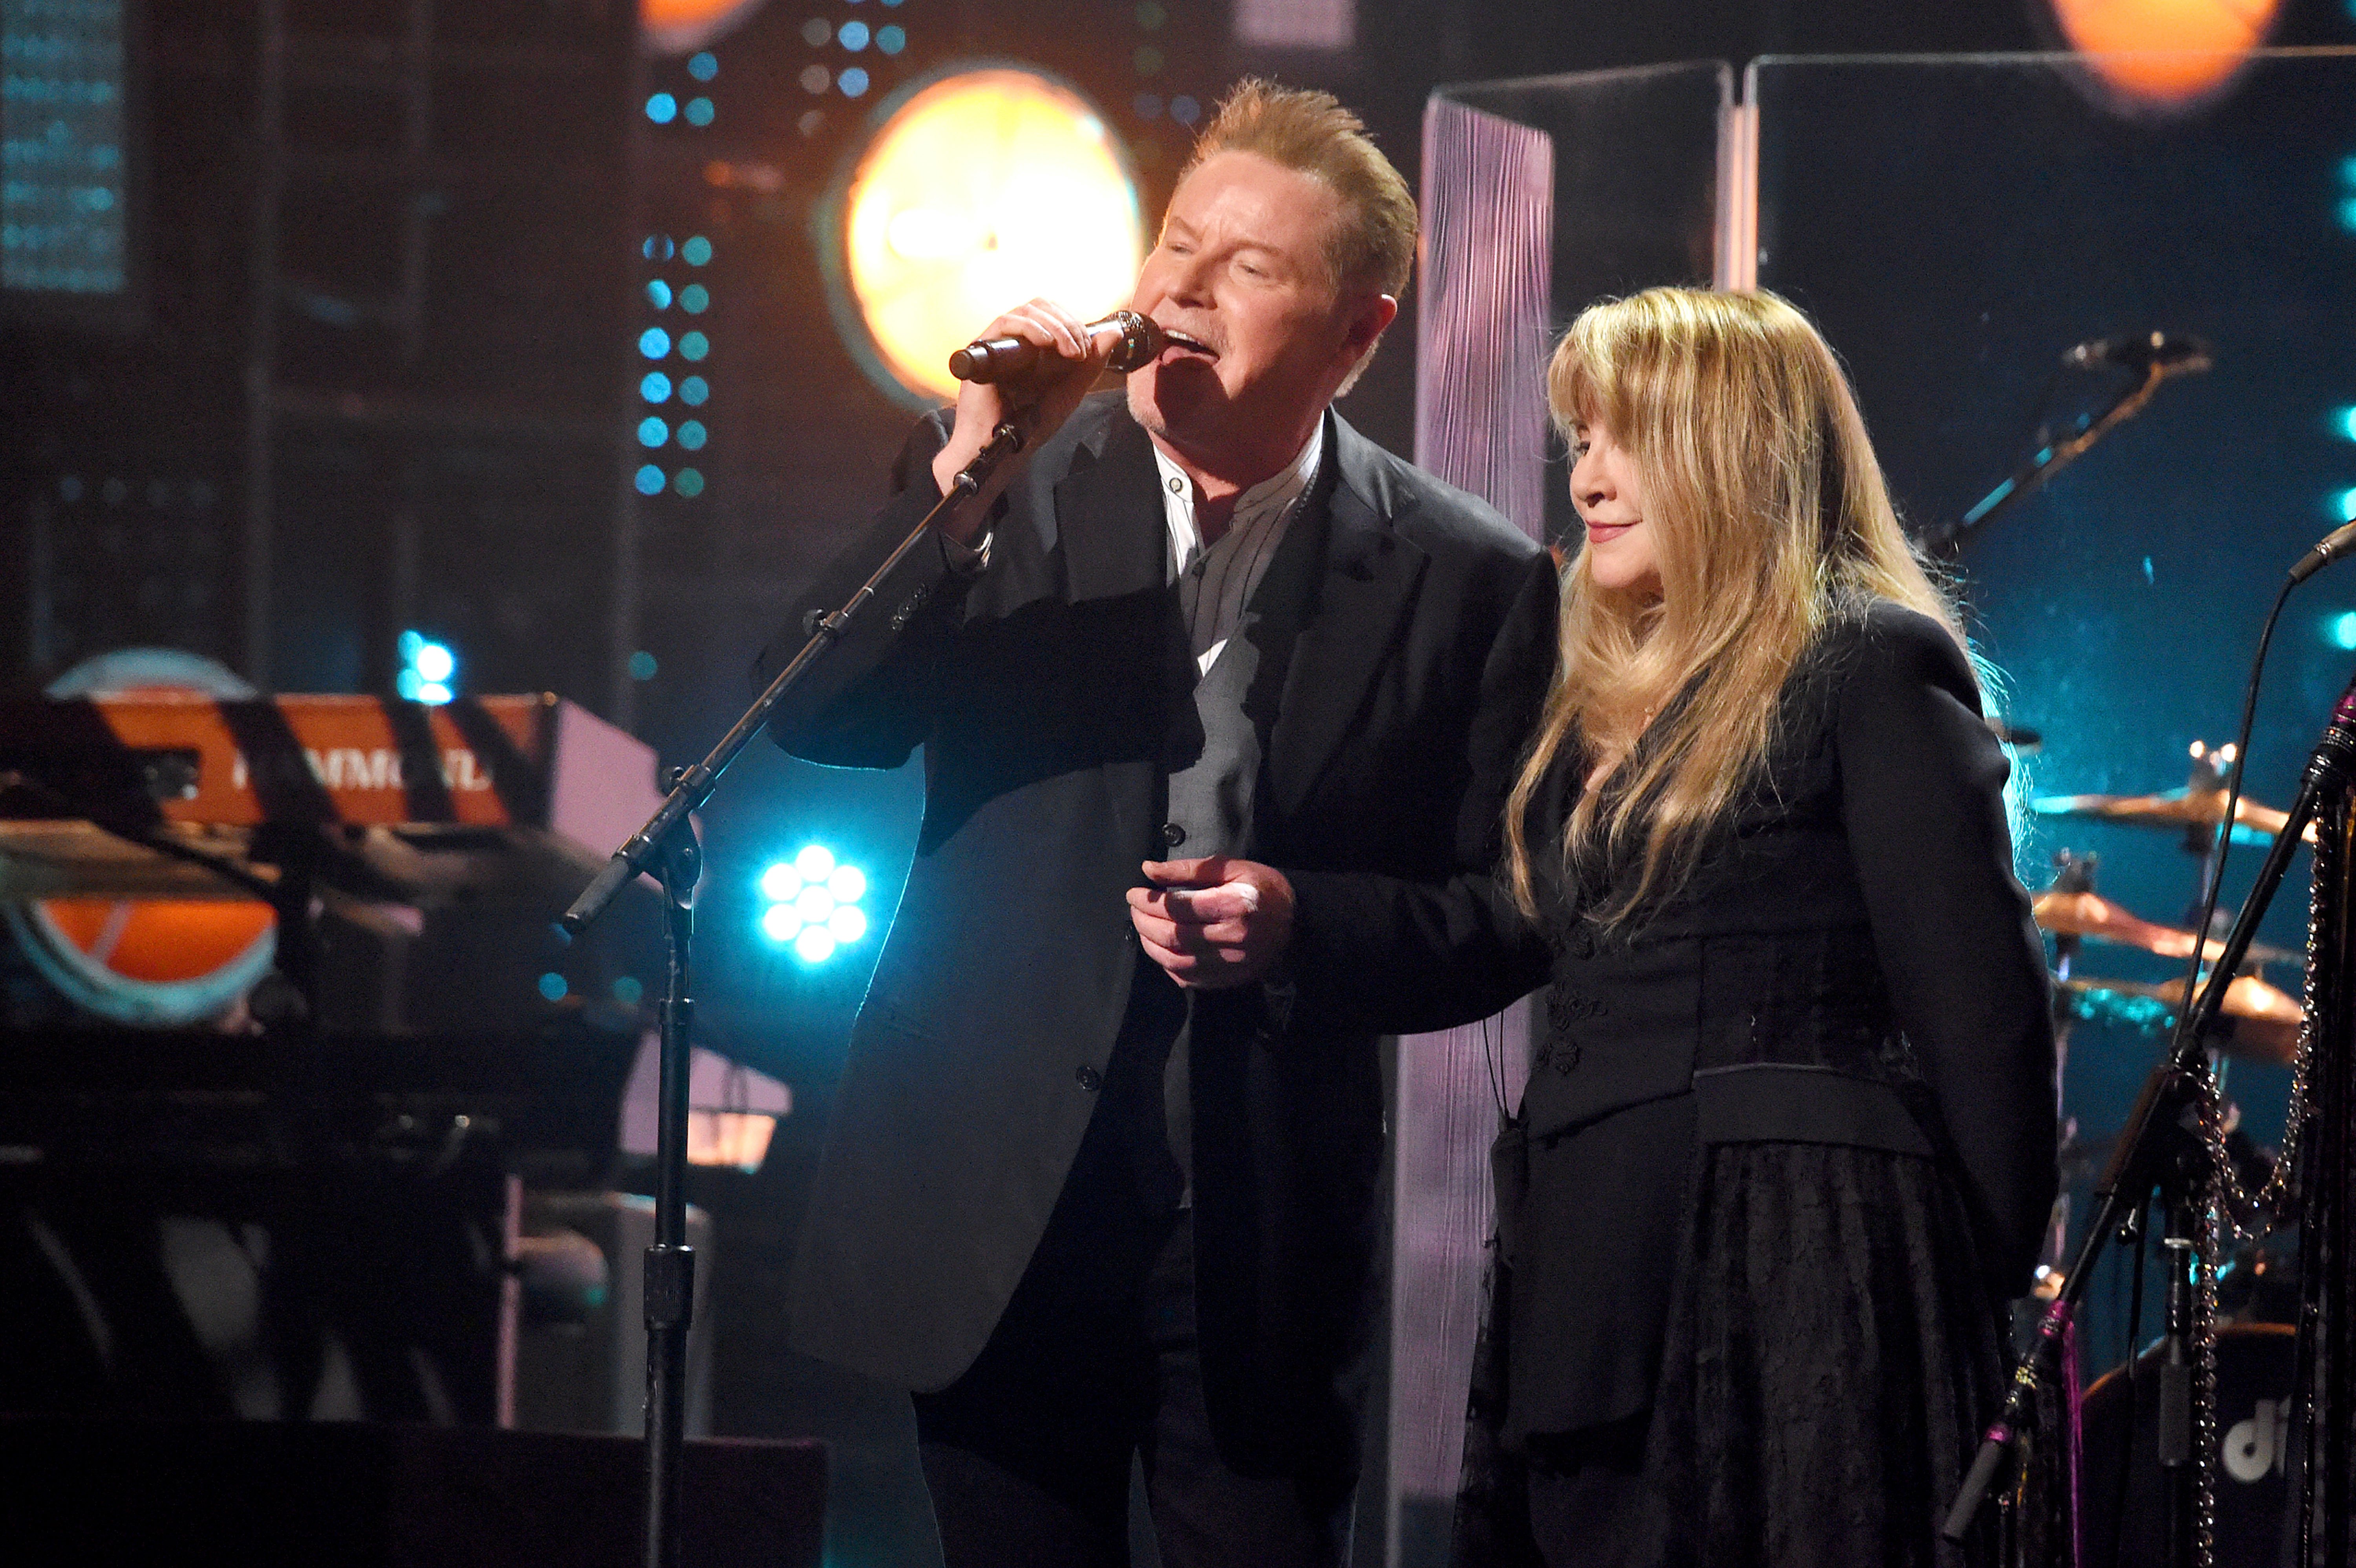 Stevie Nicks and Don Henley at the 2019 Rock & Roll Hall Of Fame Induction Ceremony on March 29, 2019 | Source: Getty Images